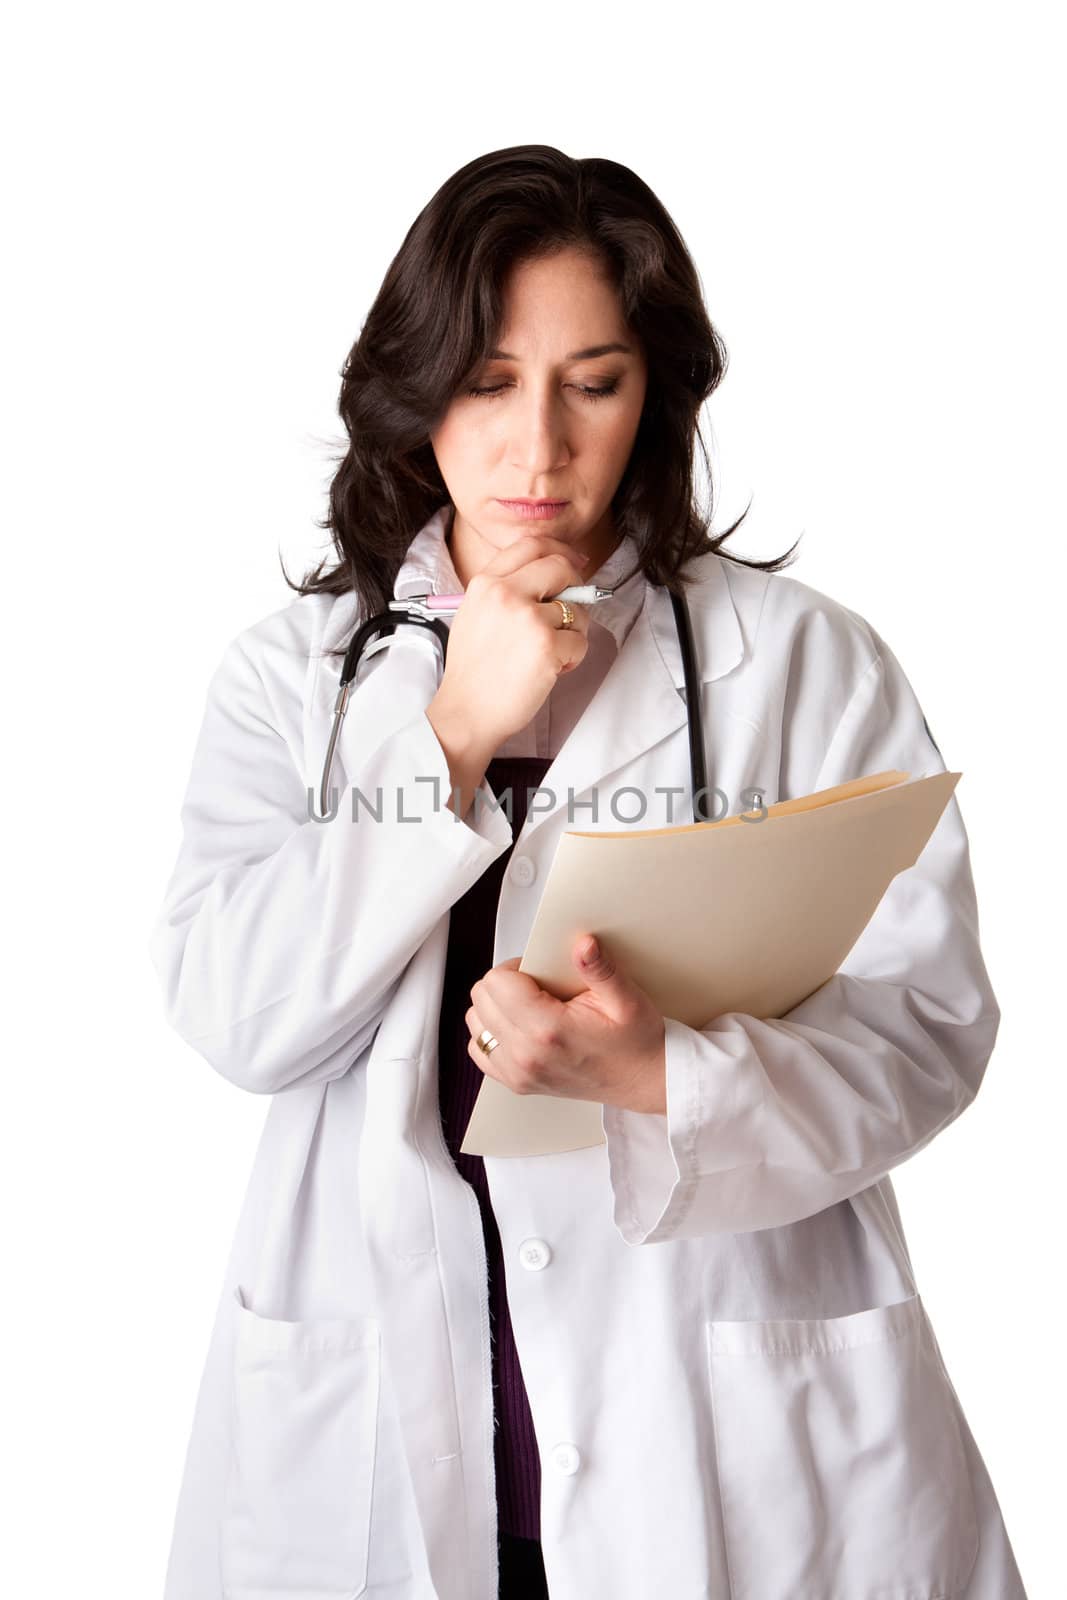 Female doctor in white coat looking at patient record chart and thinking about health, isolated.